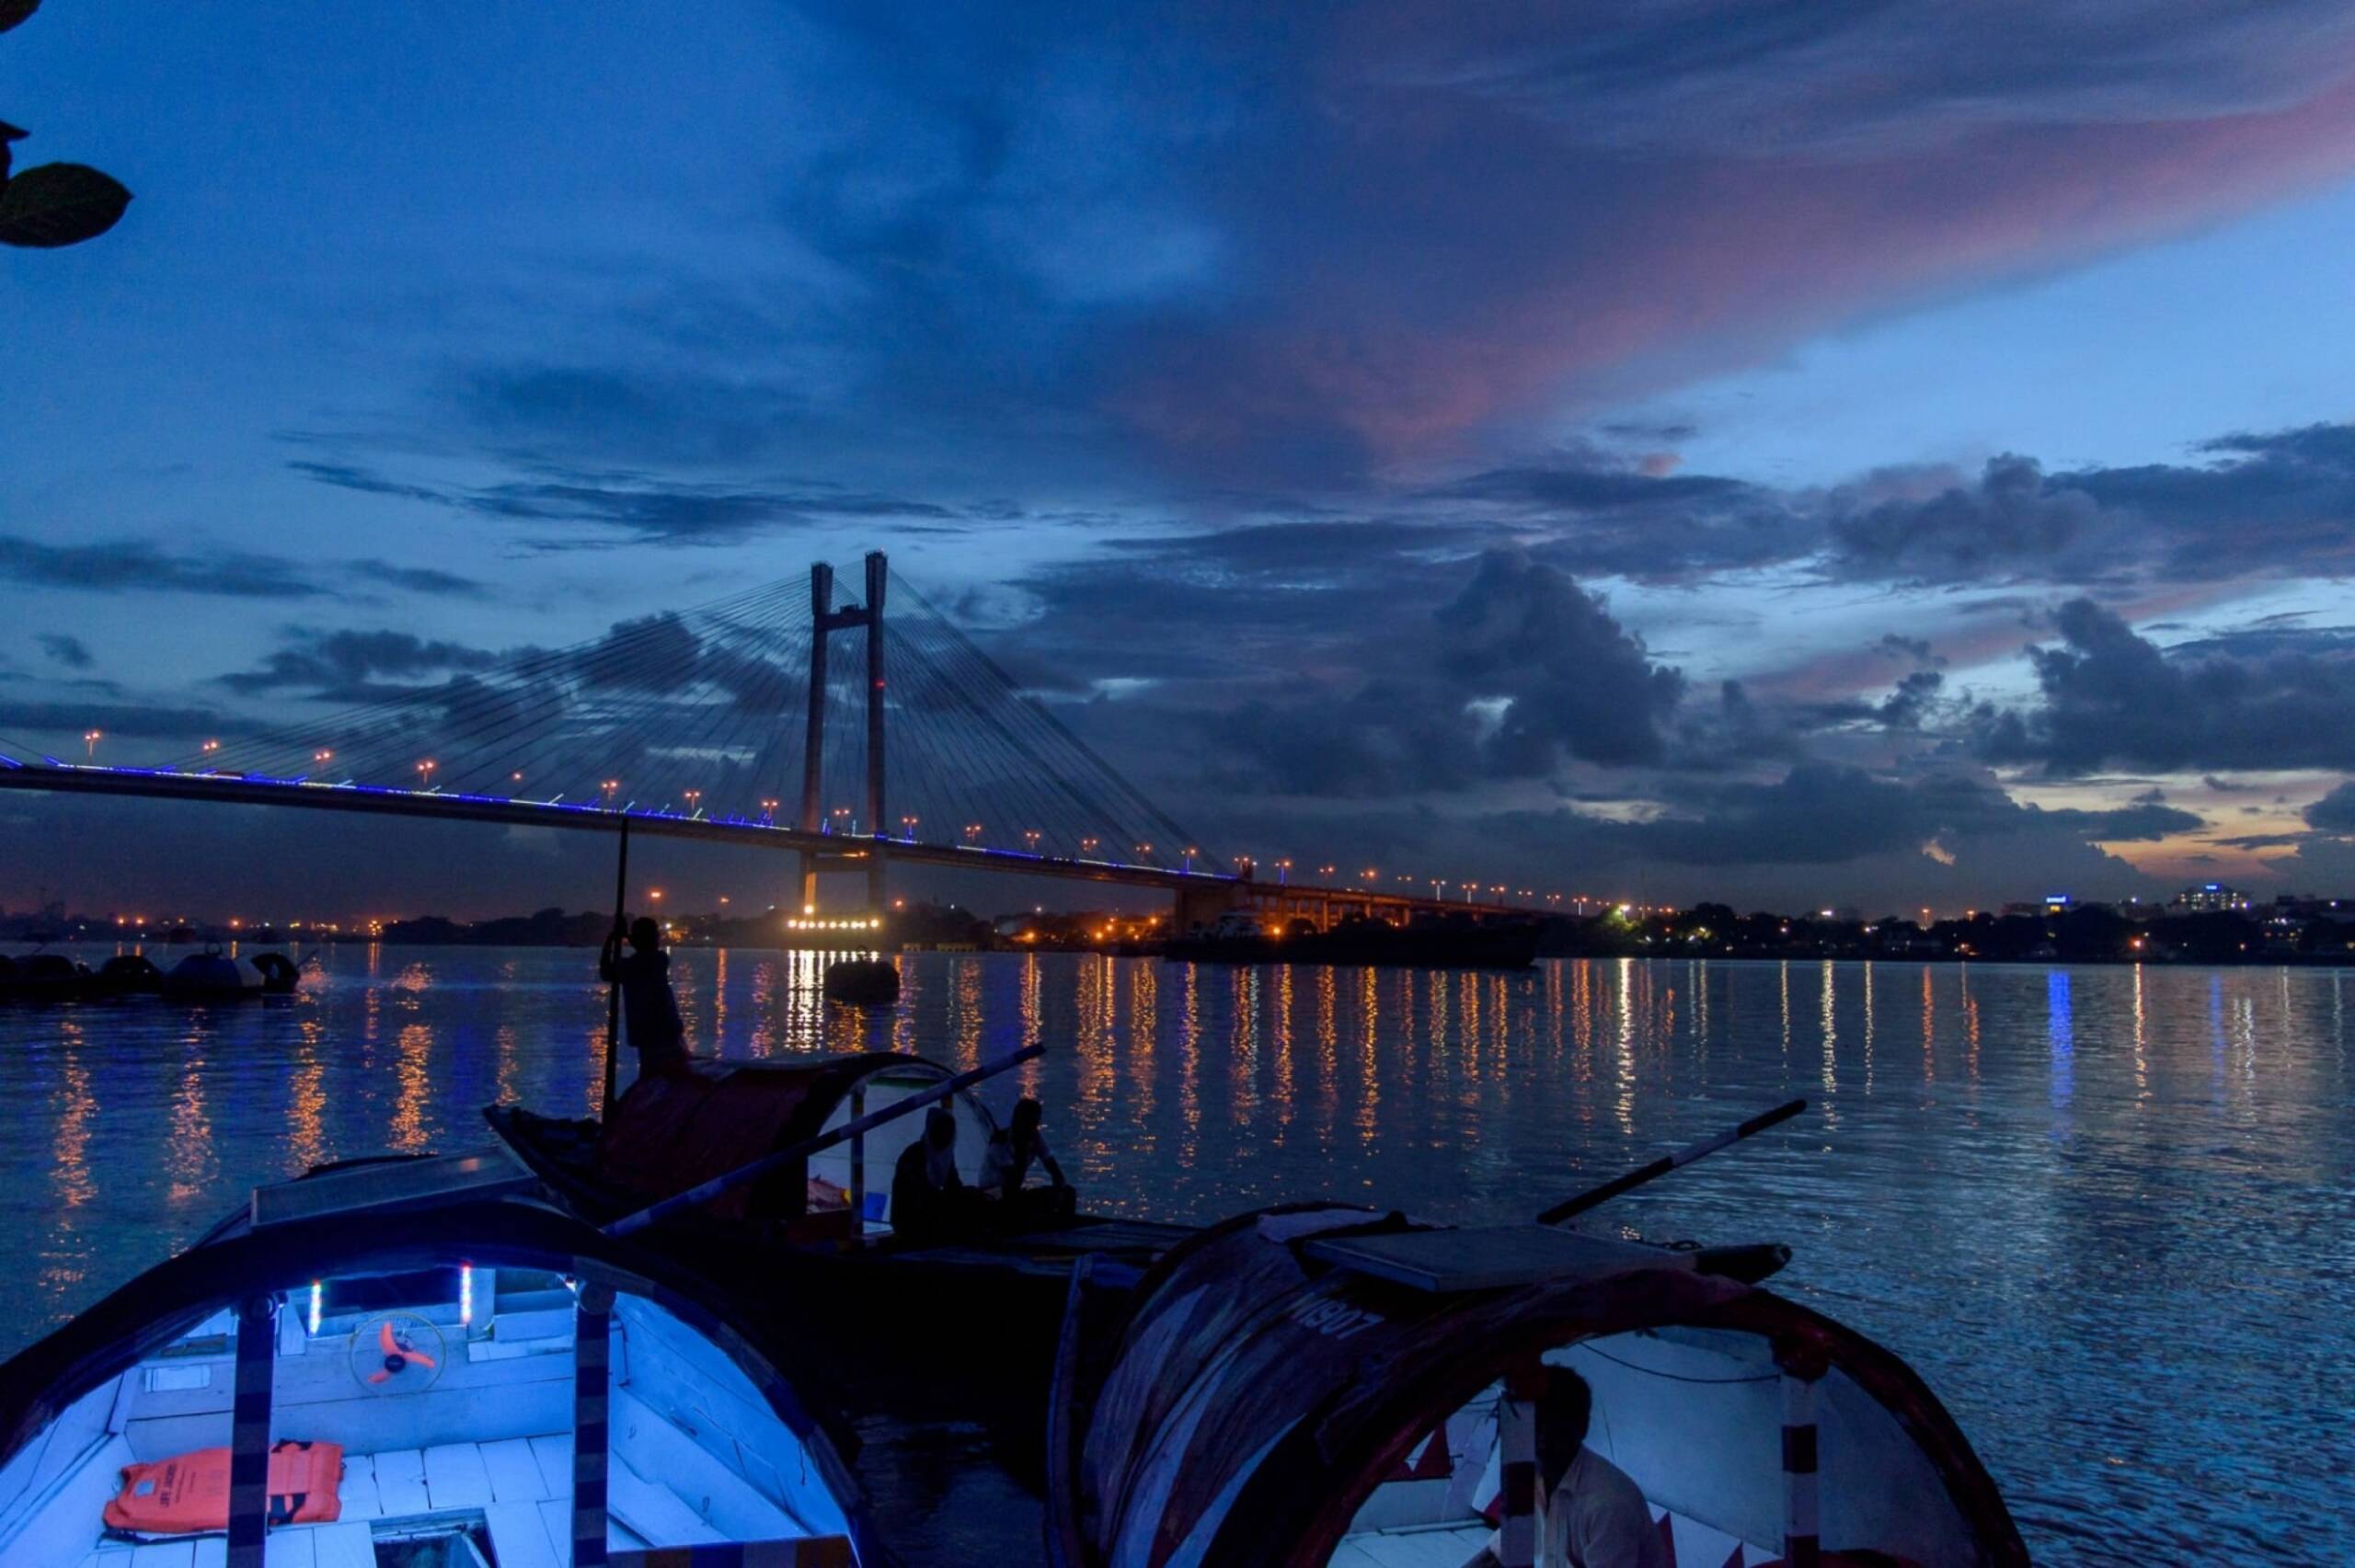 Silhouette of Vidyasagar Setu Bridge at Twilight, Framed by a Wooden Boat on the Hooghly River